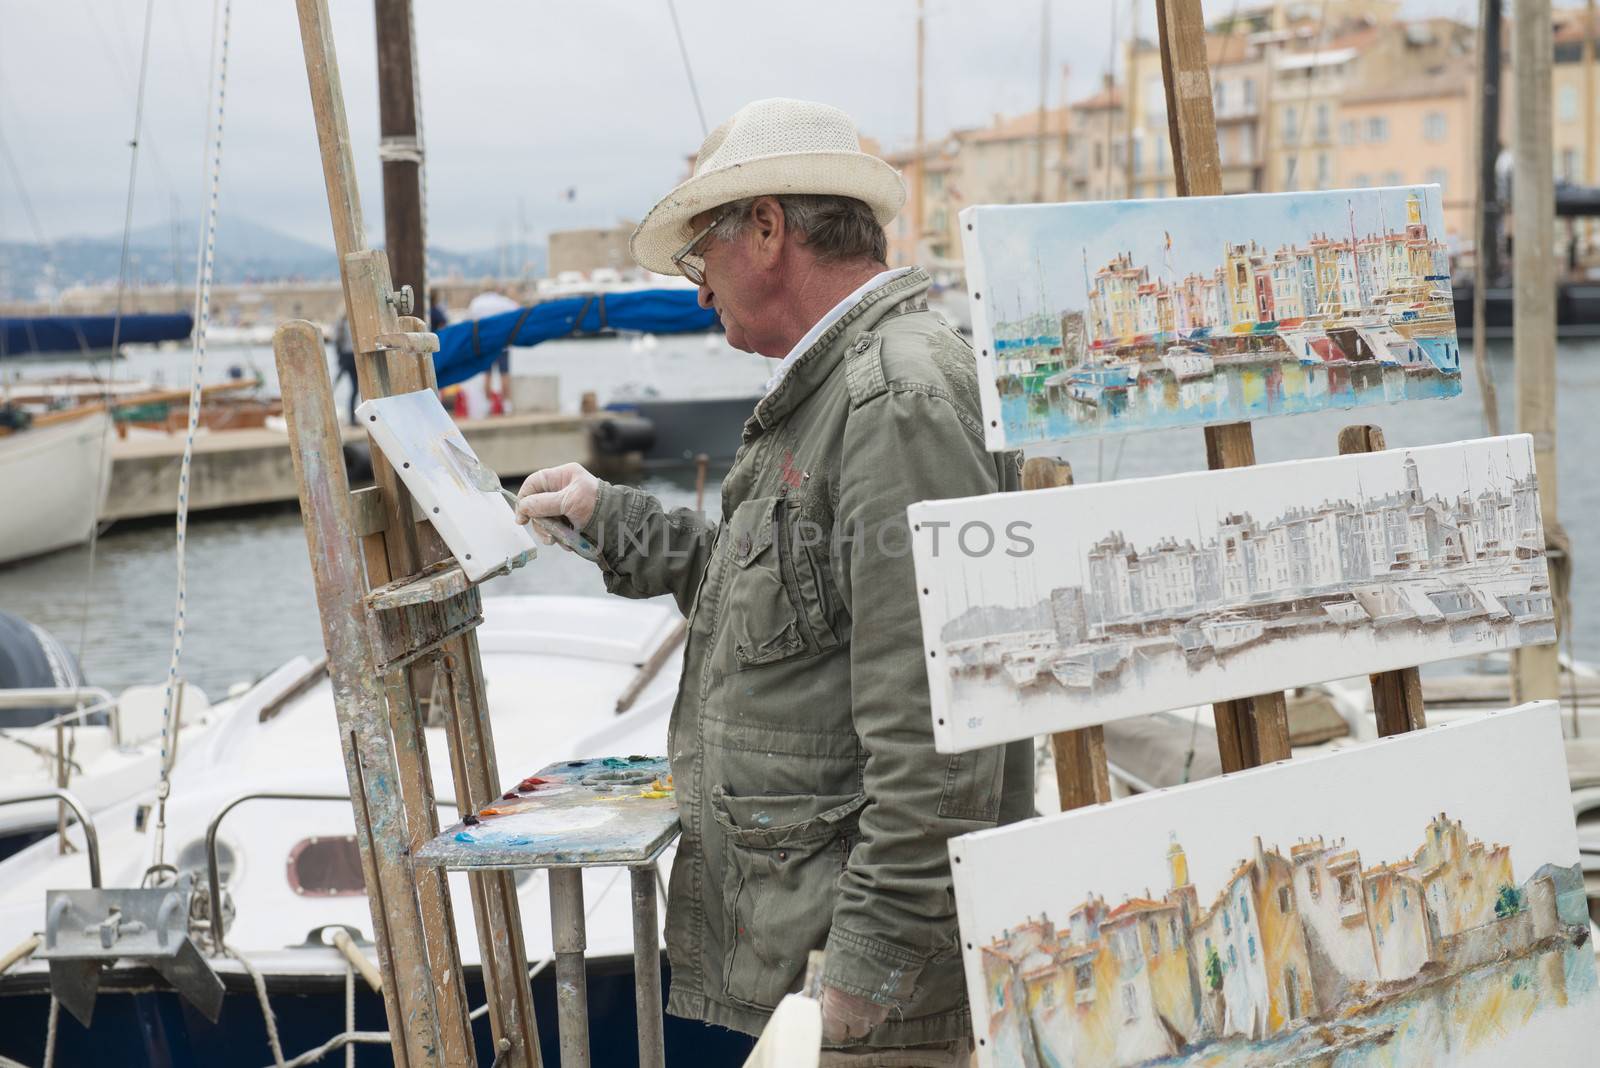 Saint Tropez, France - October 21, 2013: Street artist in Saint Tropez was painting and selling his work along the habour. 